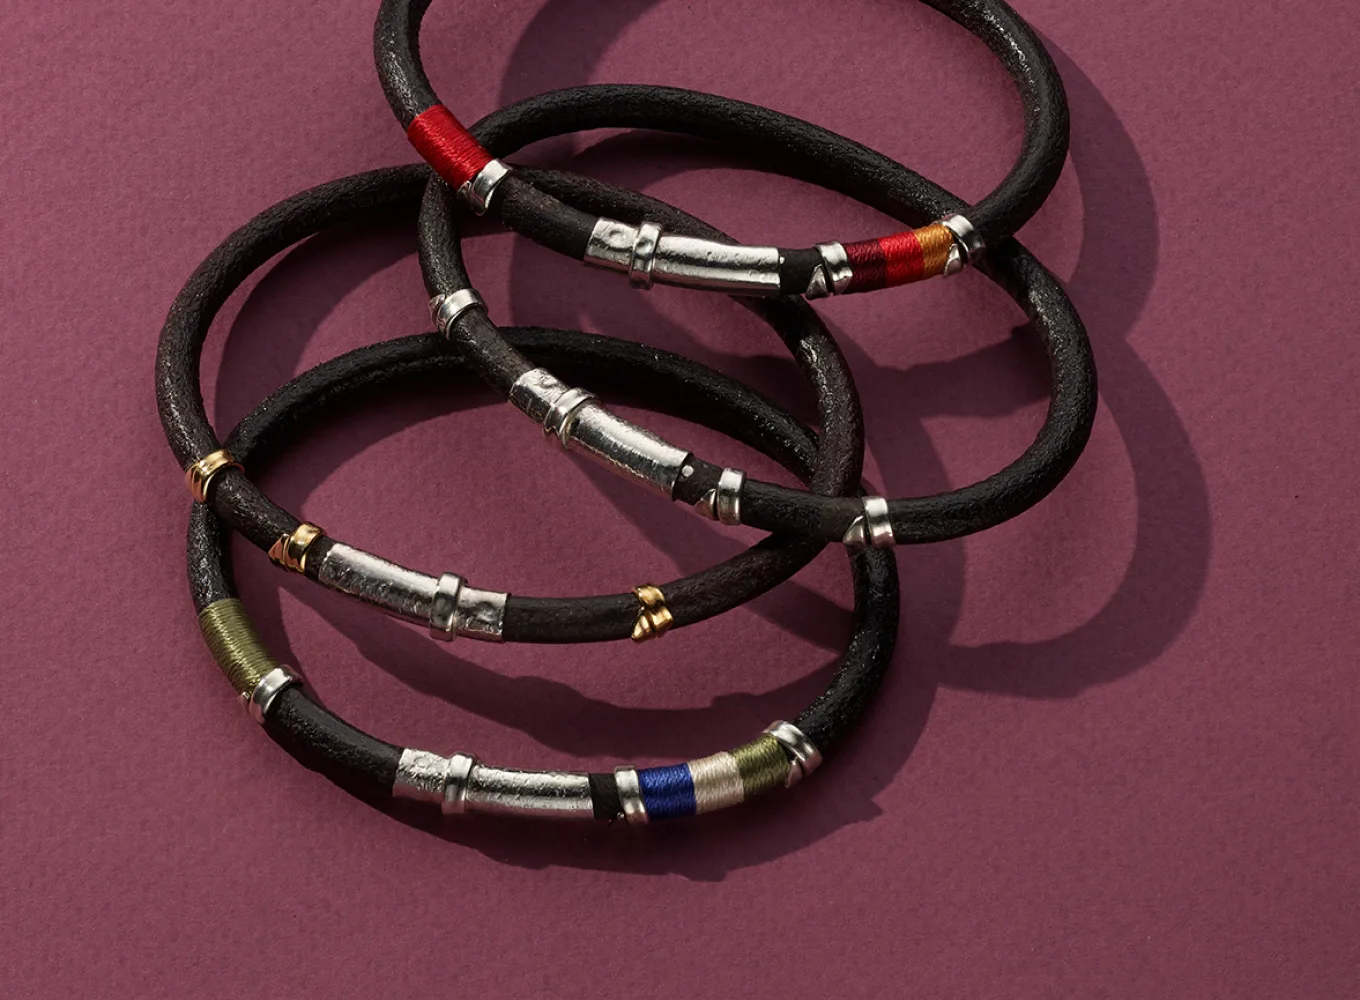 Fire Elements Leather Bracelet with Silk & Silver This espresso-brown leather bracelet features sterling silver accents and colorful silk accents in red, maroon, and orange. A push lock clasp seamlessly keeps this bracelet secure. Adam Leather Bracelet with Silver Accents This espresso-brown leather bracelet features sterling silver accents for a look that will complement any outfit. A push lock clasp seamlessly keeps this bracelet secure. Adam Leather Bracelet with Silver & Gold Accents This espresso-brown leather bracelet features 14-karat yellow gold accents for a look that will complement any outfit. A sterling silver push lock clasp seamlessly keeps this bracelet secure. Earth Elements Leather Bracelet with Silk & Silver This espresso-brown leather bracelet features sterling silver accents and colorful silk accents in olive green, blue, and tan. A push lock clasp seamlessly keeps this bracelet secure.